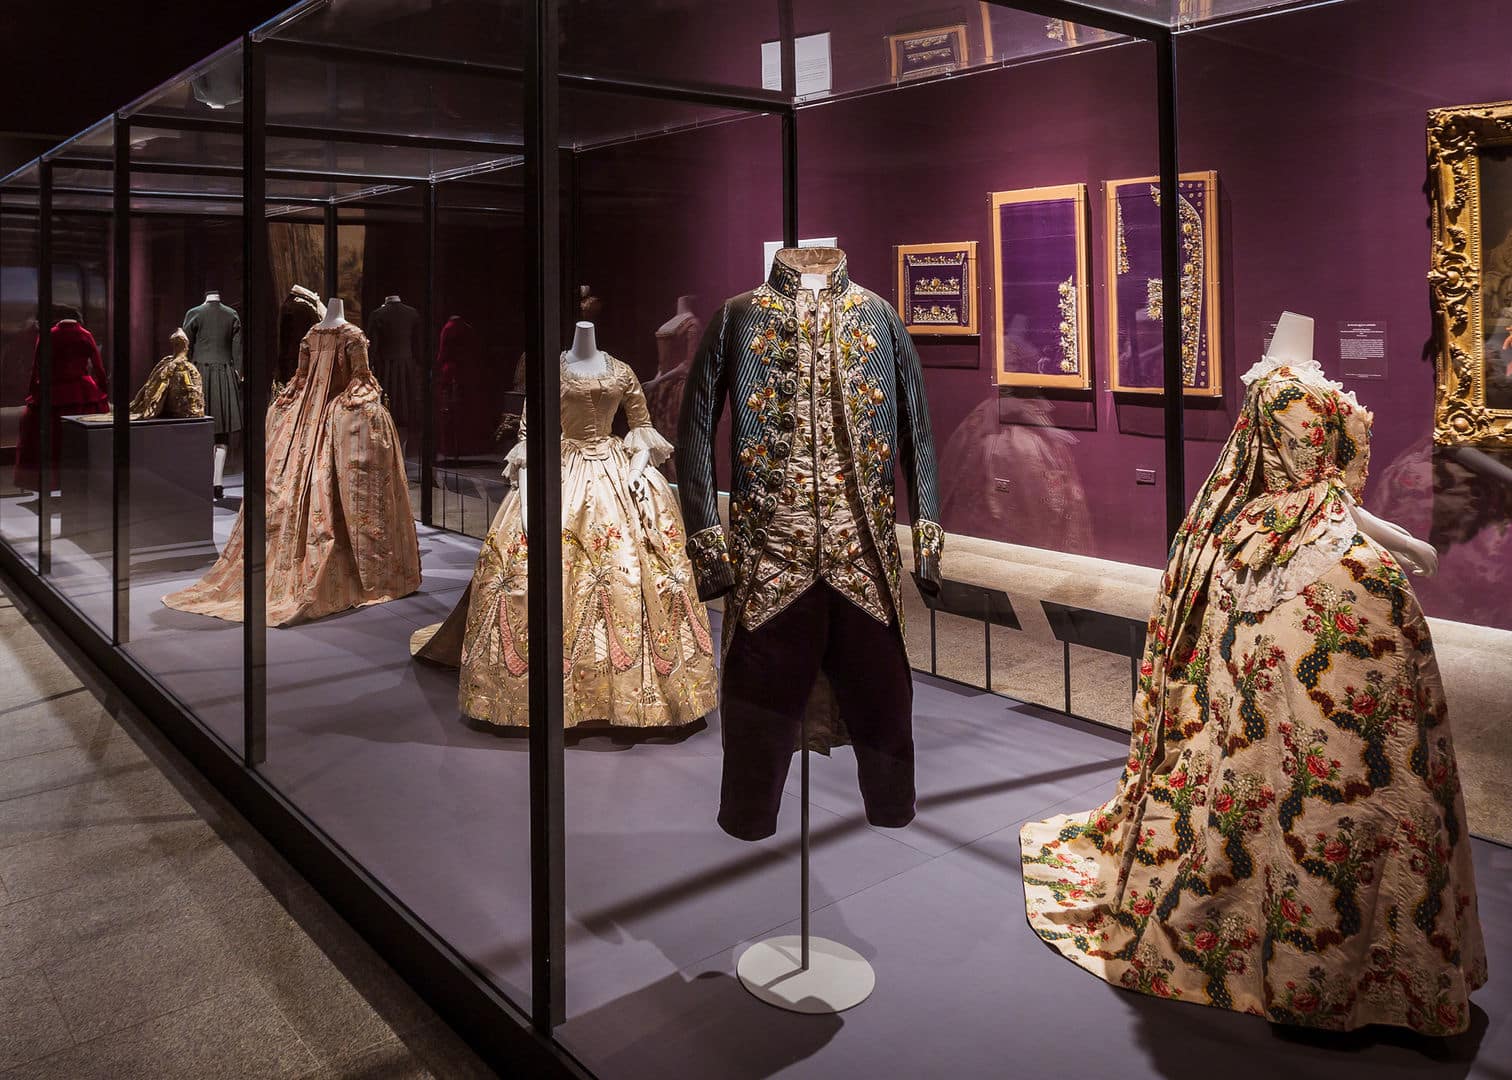 Fashion Eras from 1800 to 2000: A Timeline of Clothing Styles